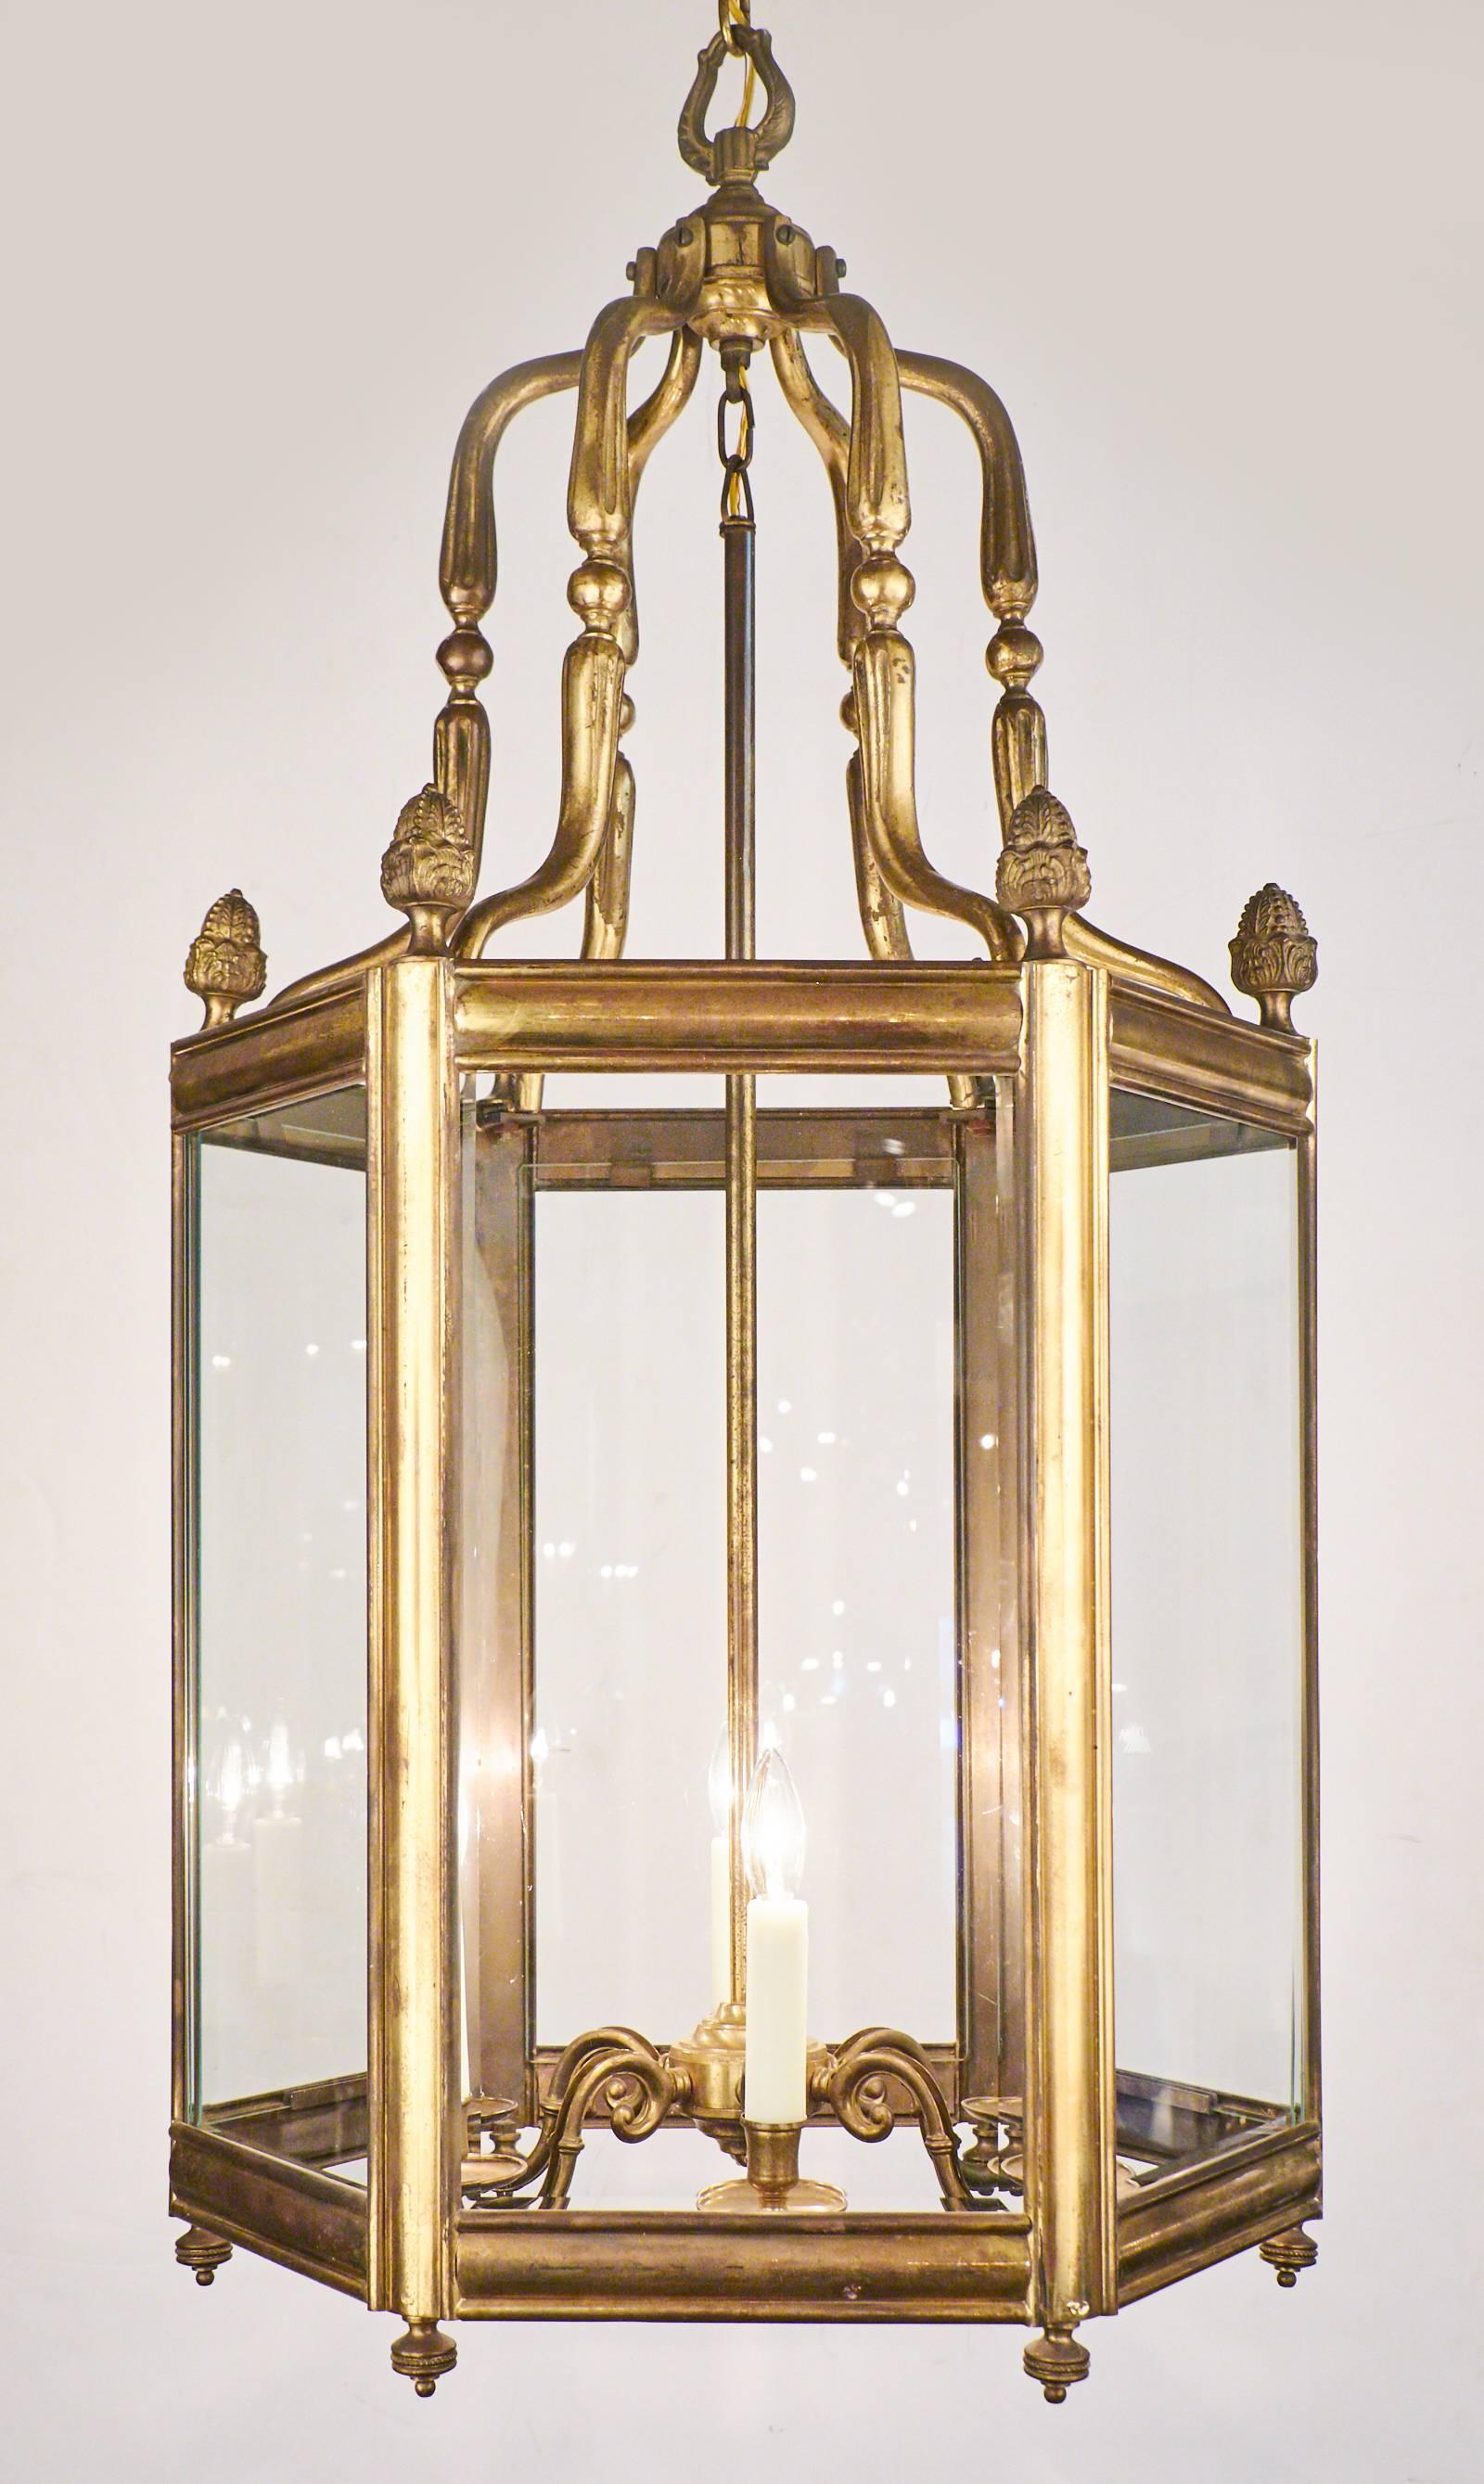 Superb large solid brass French lantern. Rewired to US standards with six candelabra sockets. Measures: Height to ceiling 71.75.